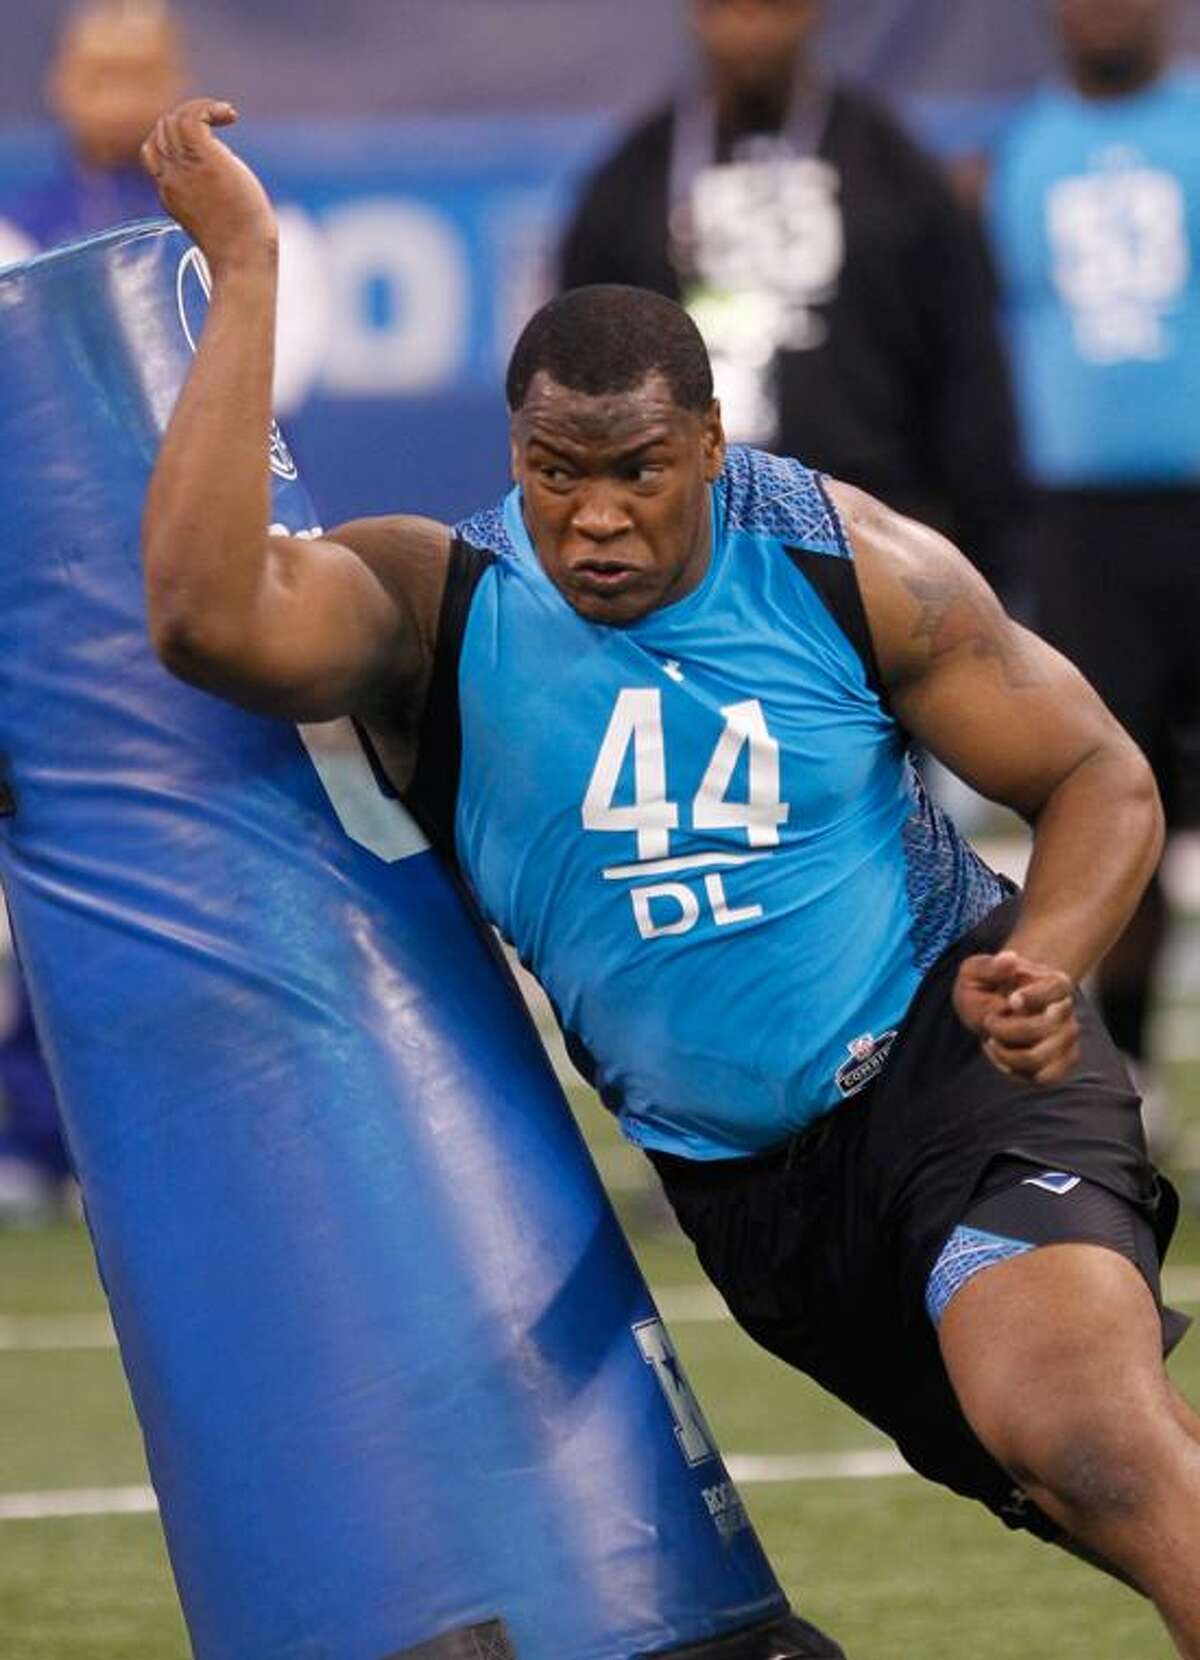 In this Feb. 27 file photo, UConn defensive tackle Kendall Reyes runs a drill at the NFL Combine in Indianapolis. Reyes was picked by the San Diego Chargers in the second round of the draft on Friday. (AP Photo/Dave Martin)